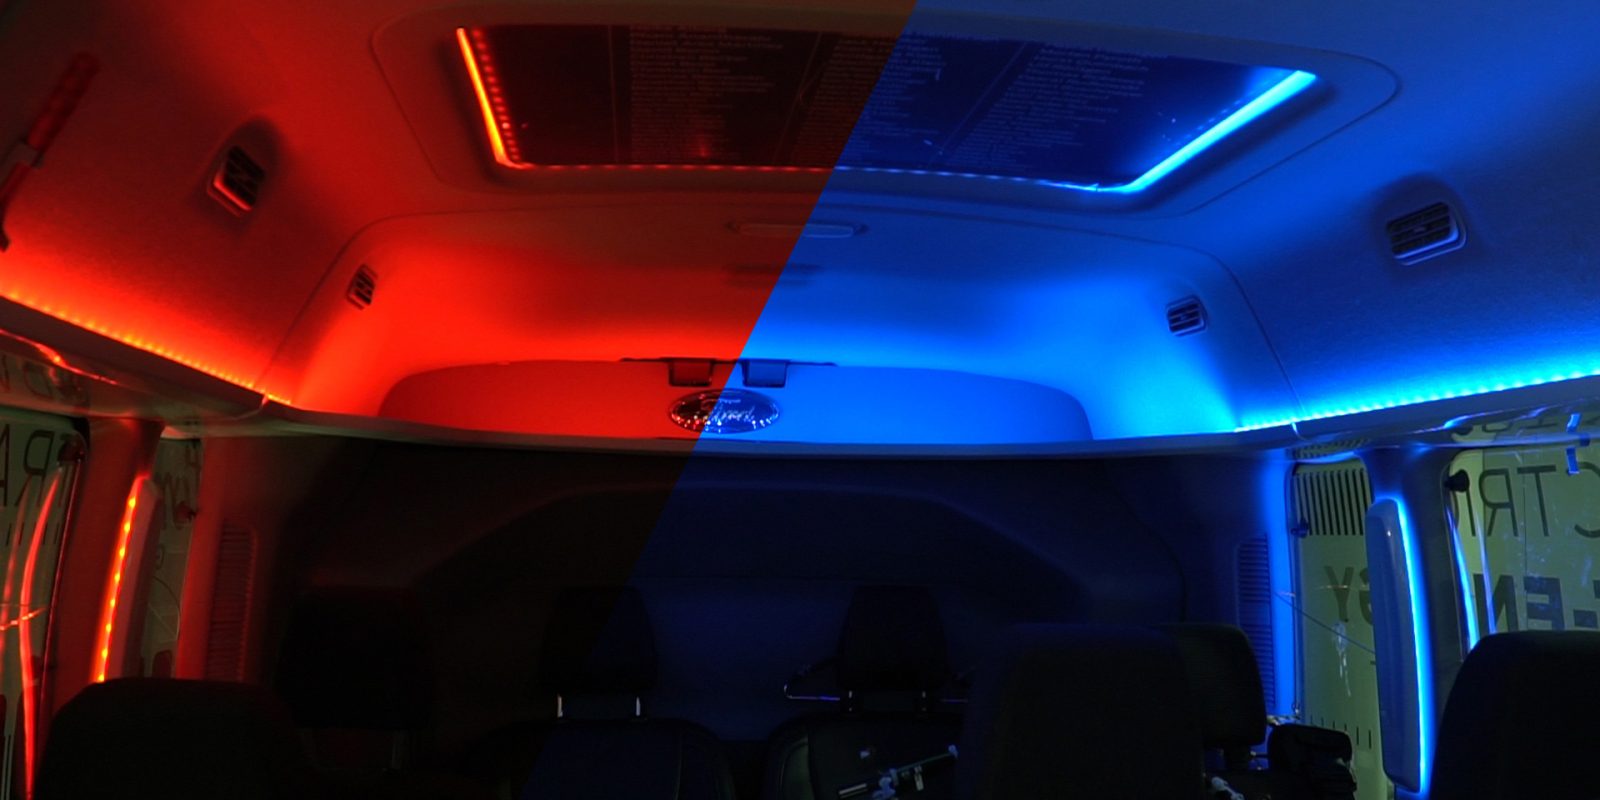 Red and blue lights in Ford electric vehicles